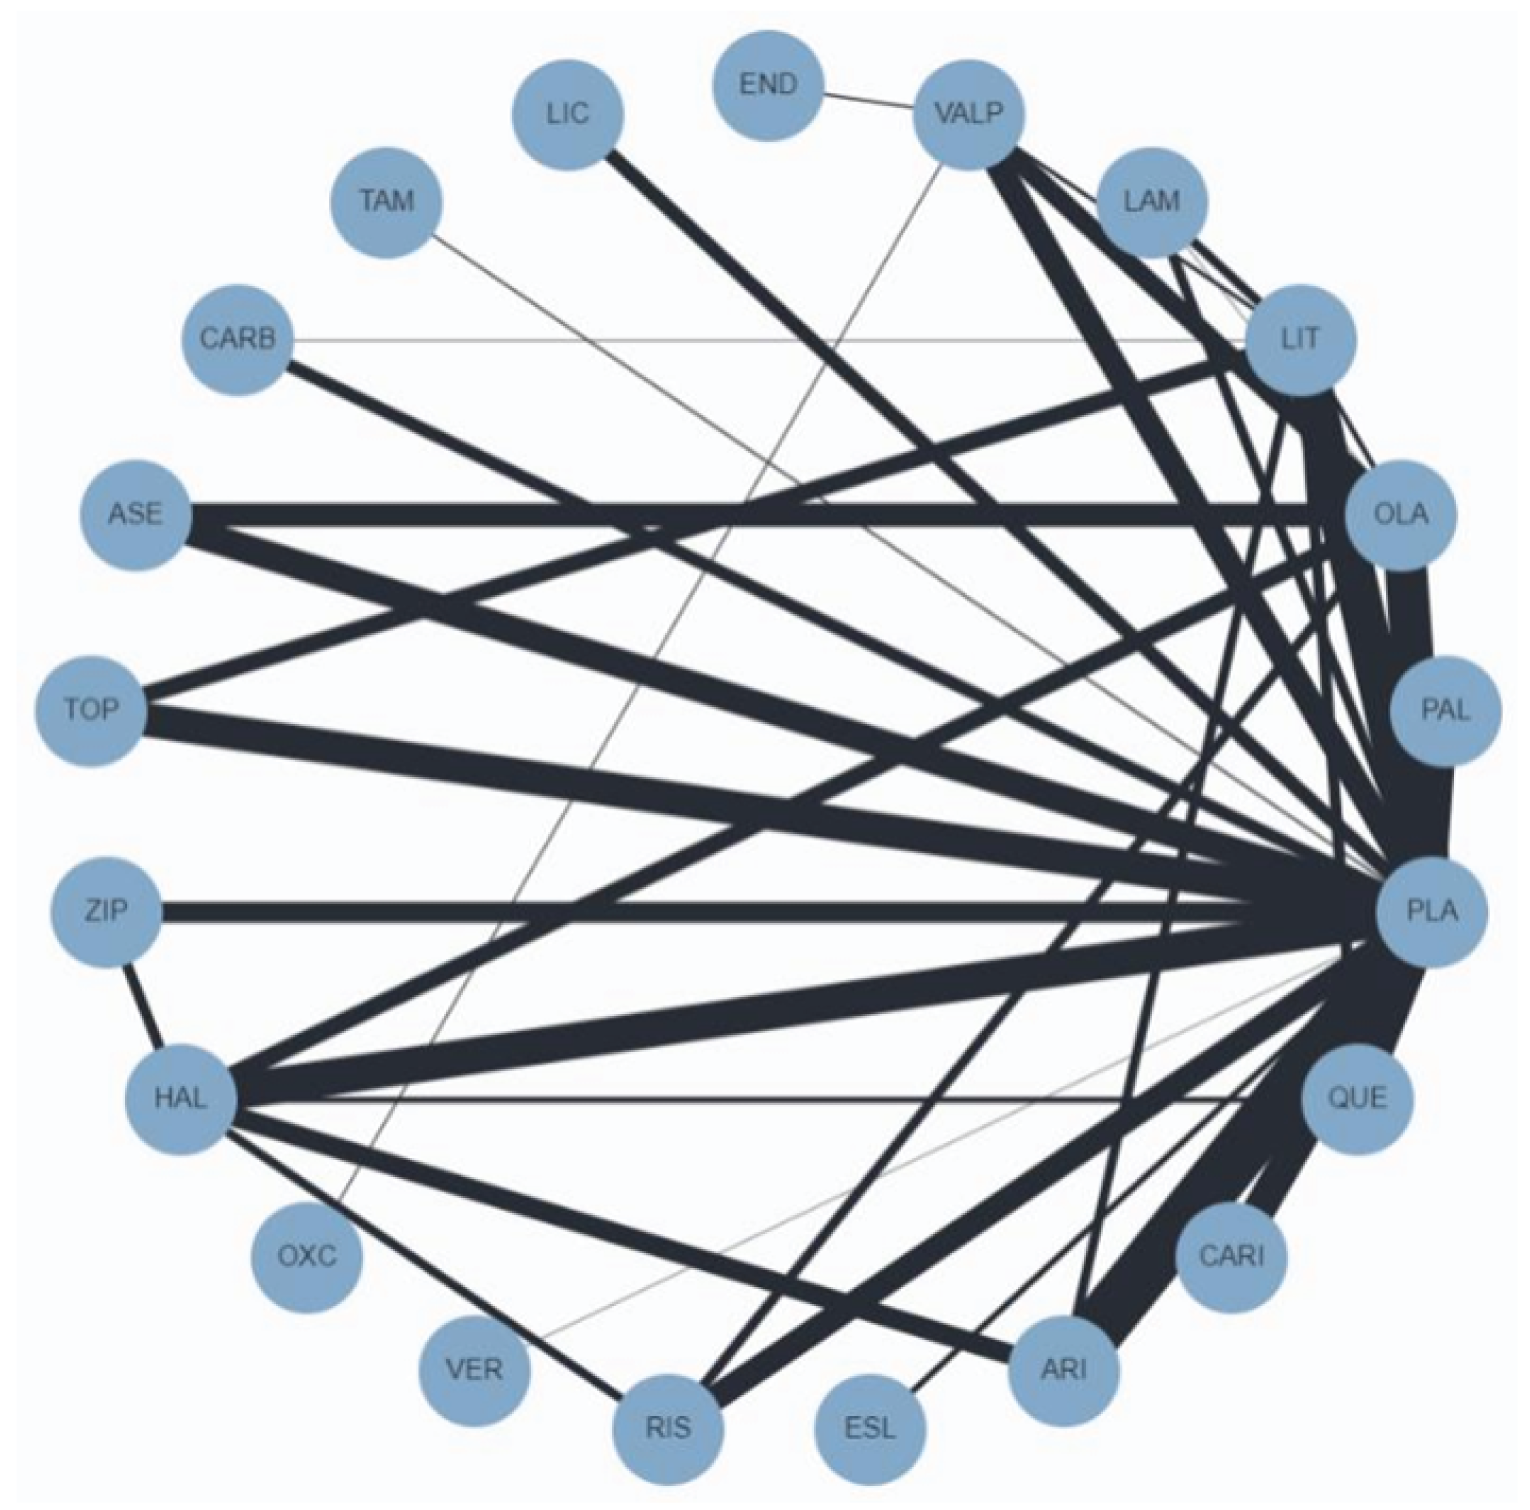 This is an image of the evidence network for response to treatment in the network meta-analysis published by Kishi et al. (2021). Cariprazine is indirectly connected to comparators through the placebo node.